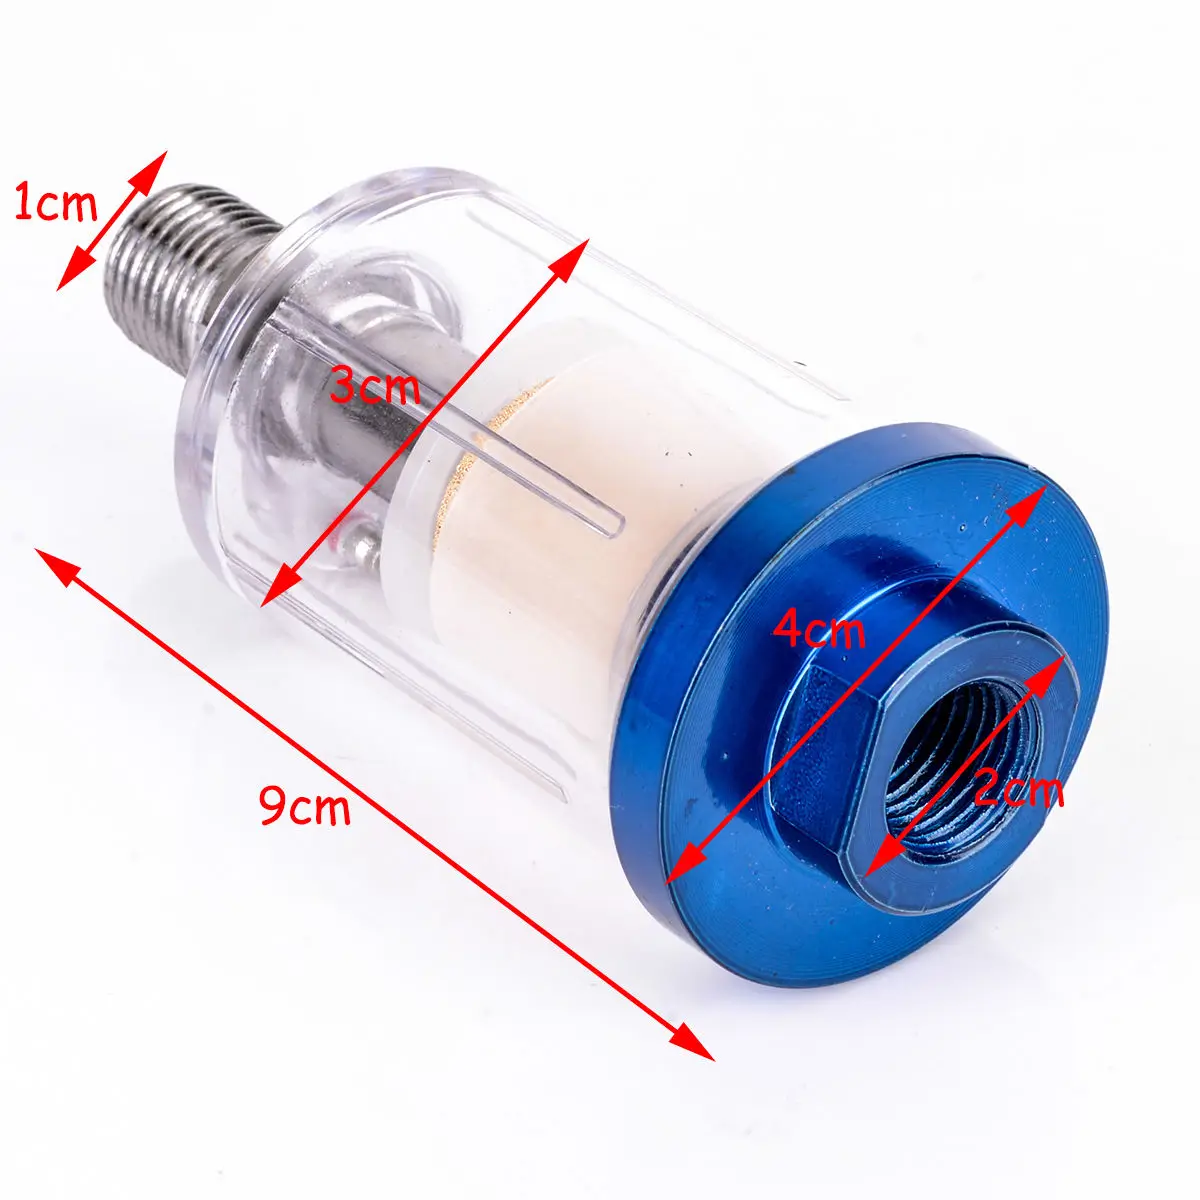 1pcs 1/4" Car Air Line Oil Water Trap Separator Filter For Compressor Spray Paint Air Line Filter Tool High Quality